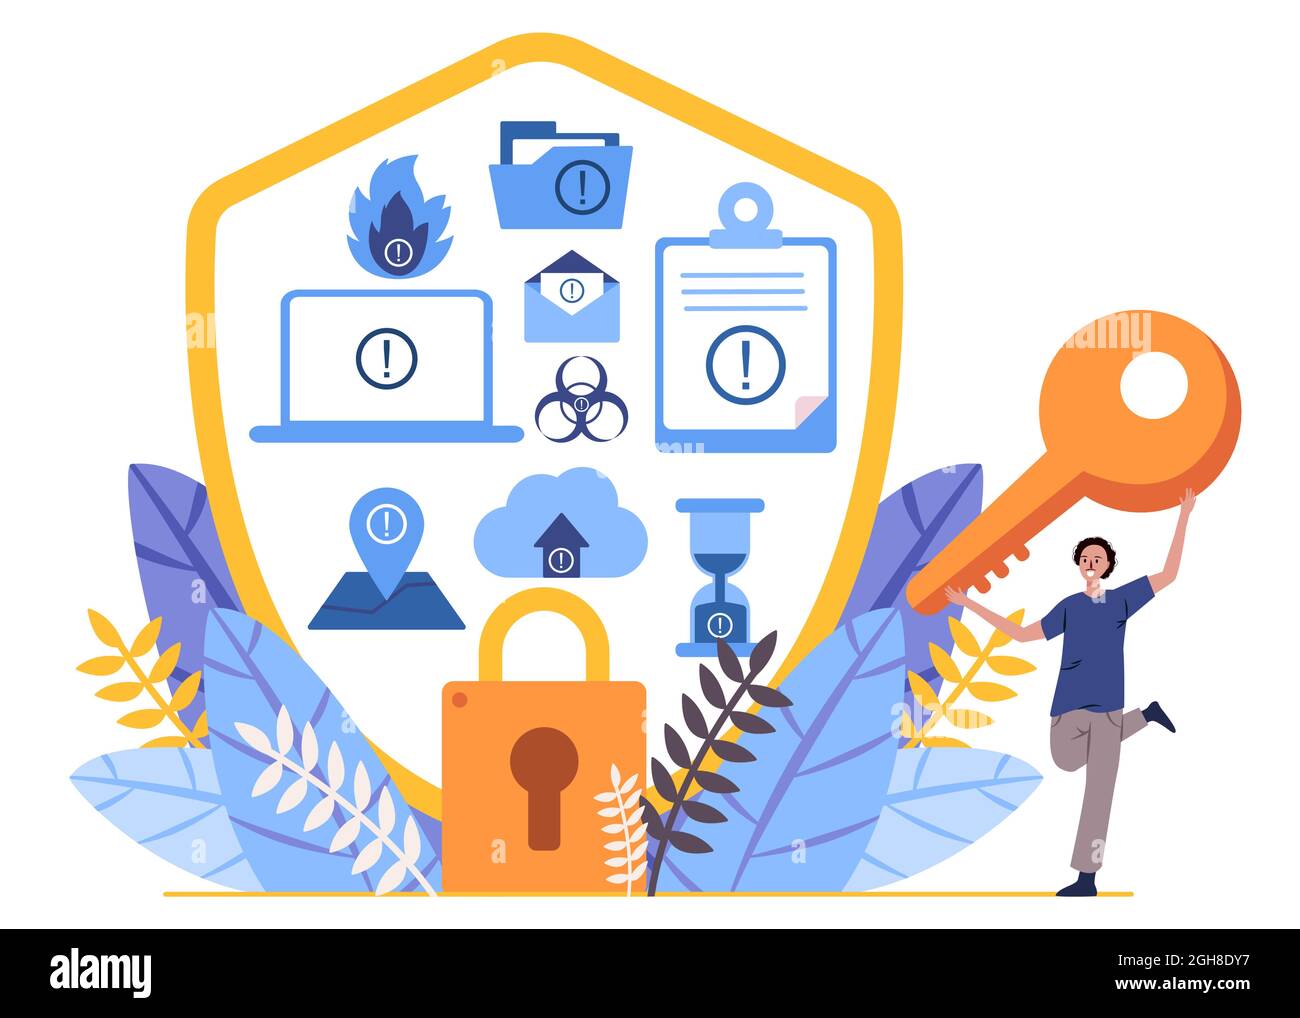 disaster recovery icons likes fire, documents, letter, location, padlock and the man holds the key lock security symbol Stock Vector